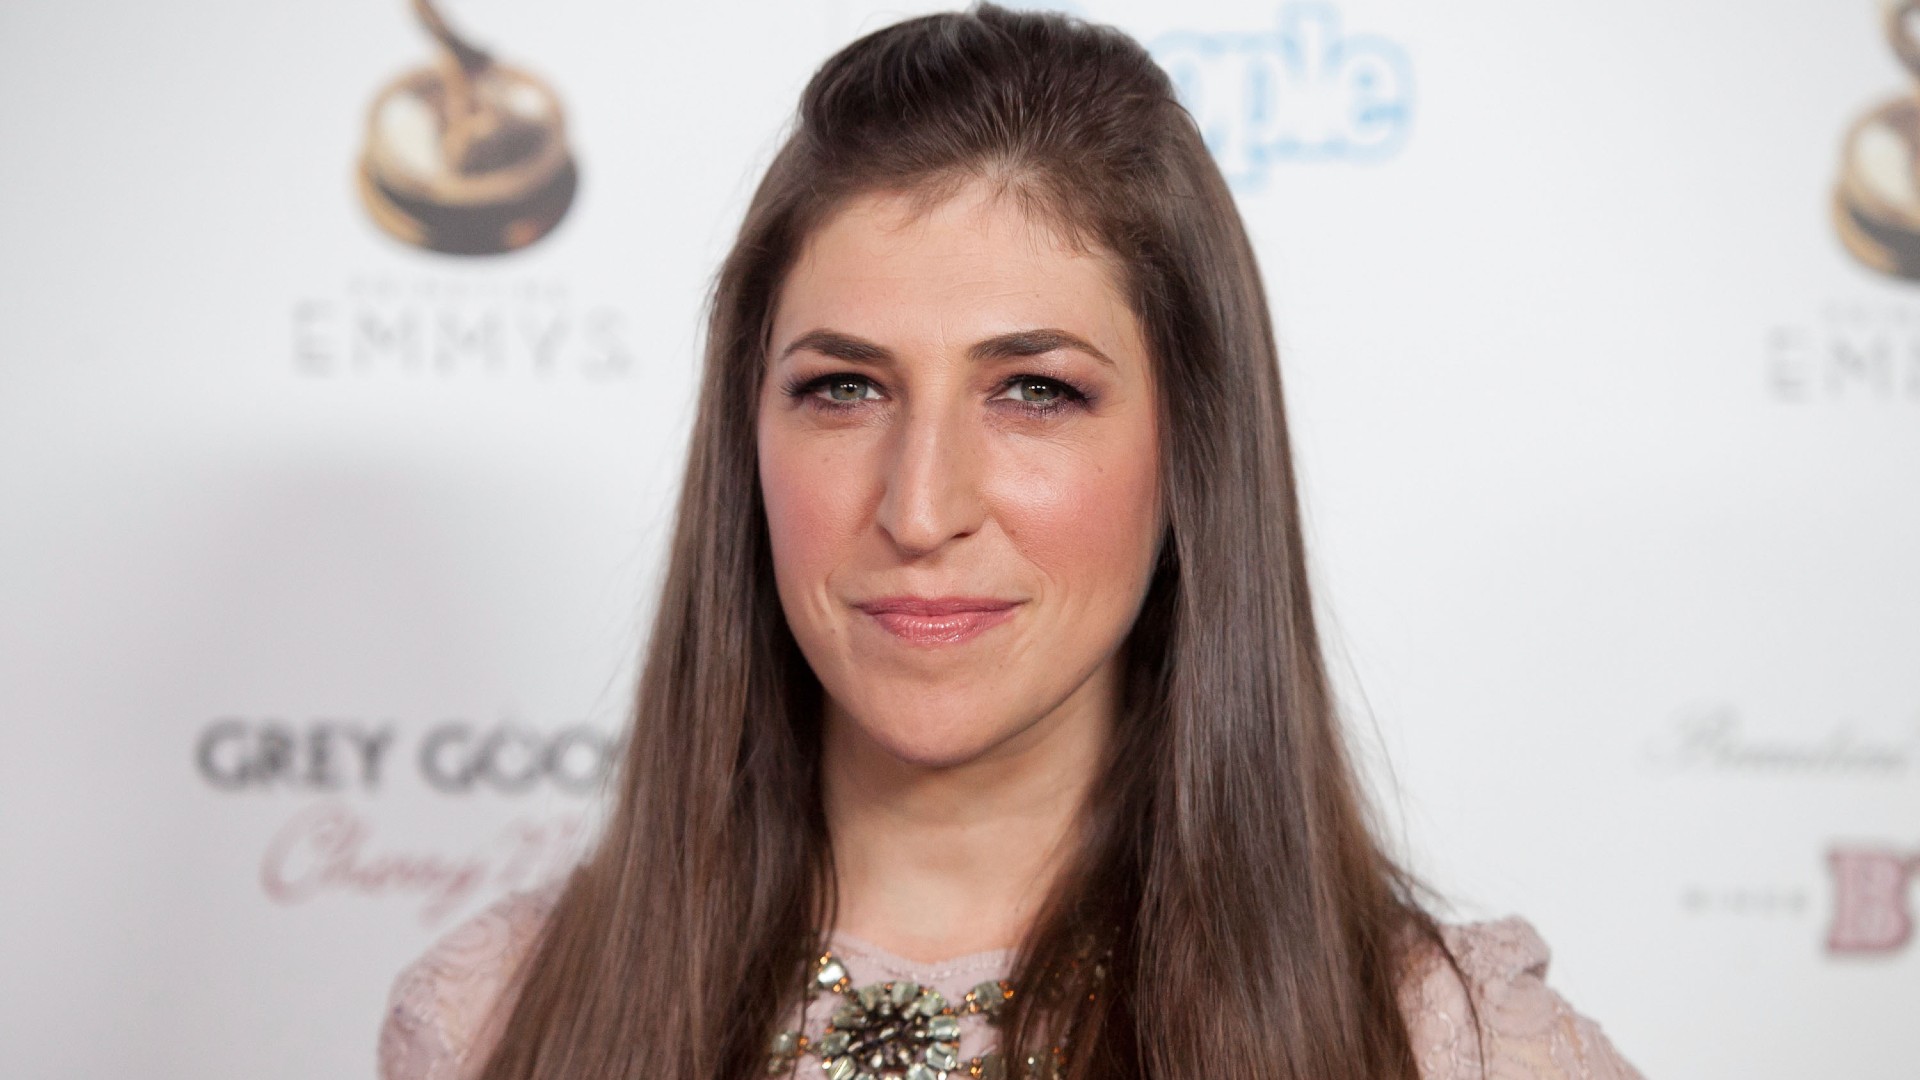 Mayim Bialik shocked by rising anti-Semitism in America: ‘No excuse for this’